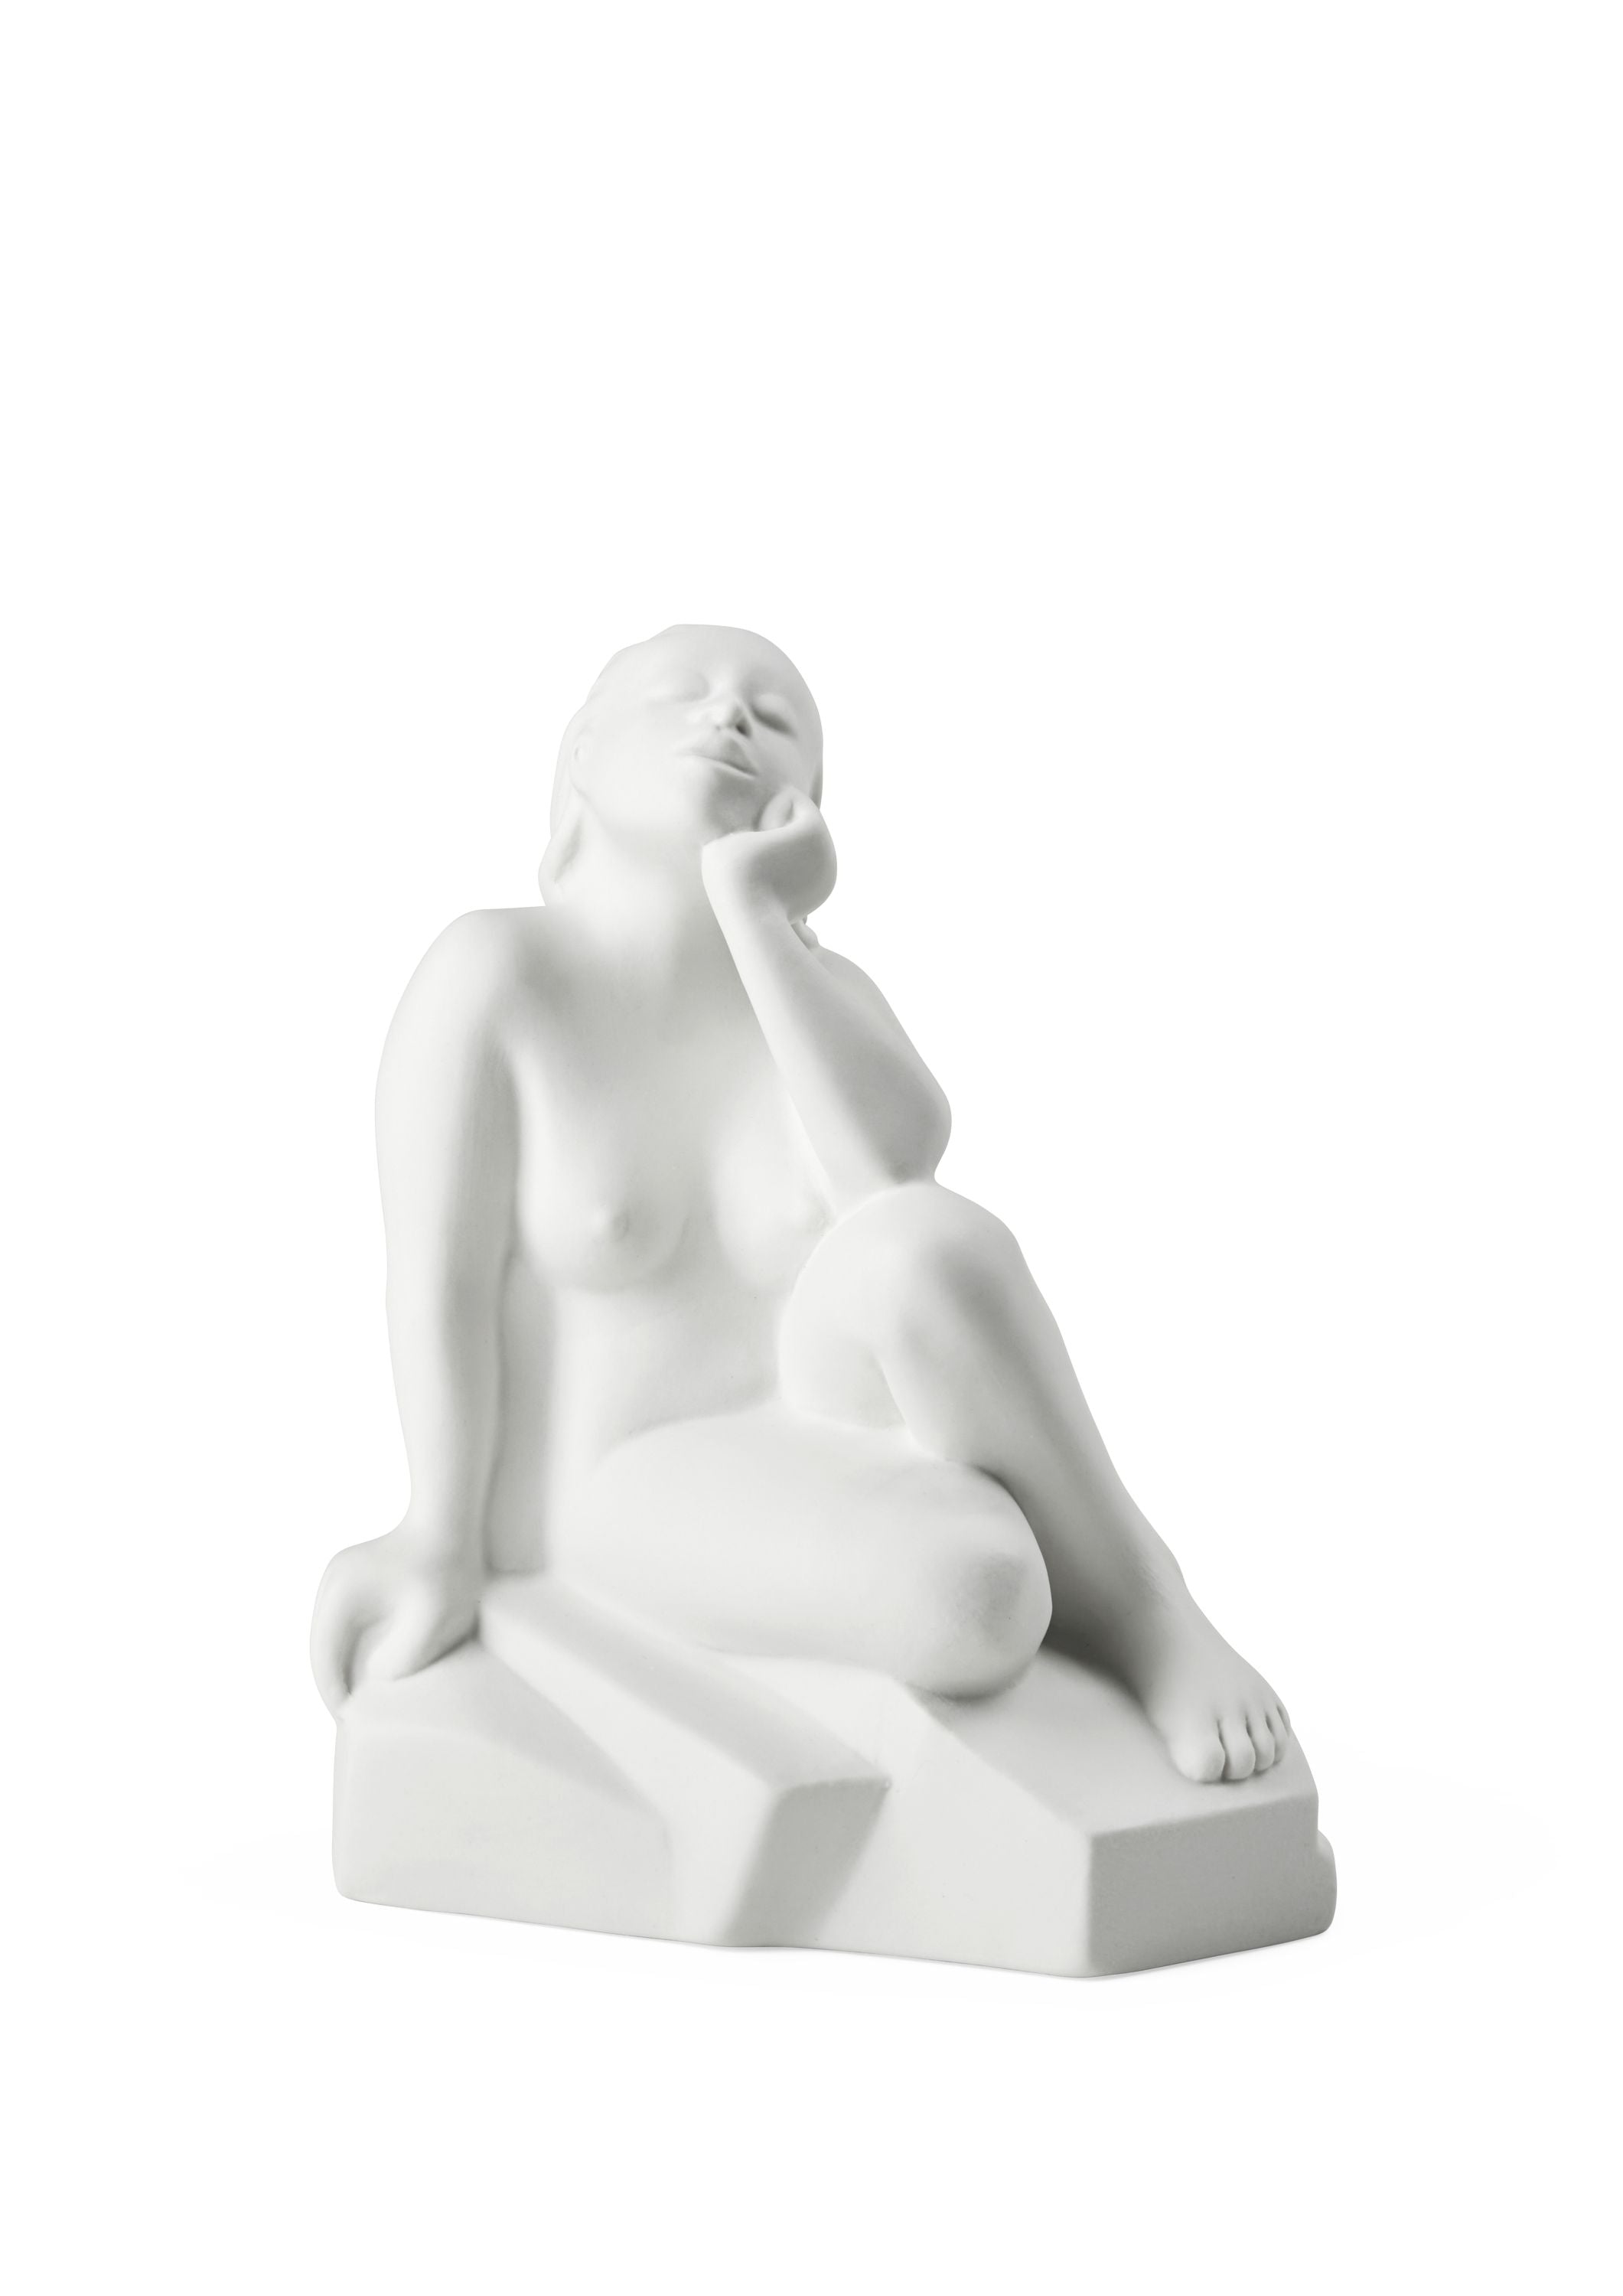 Kähler Moments of Being Silent Change H18,5 cm White